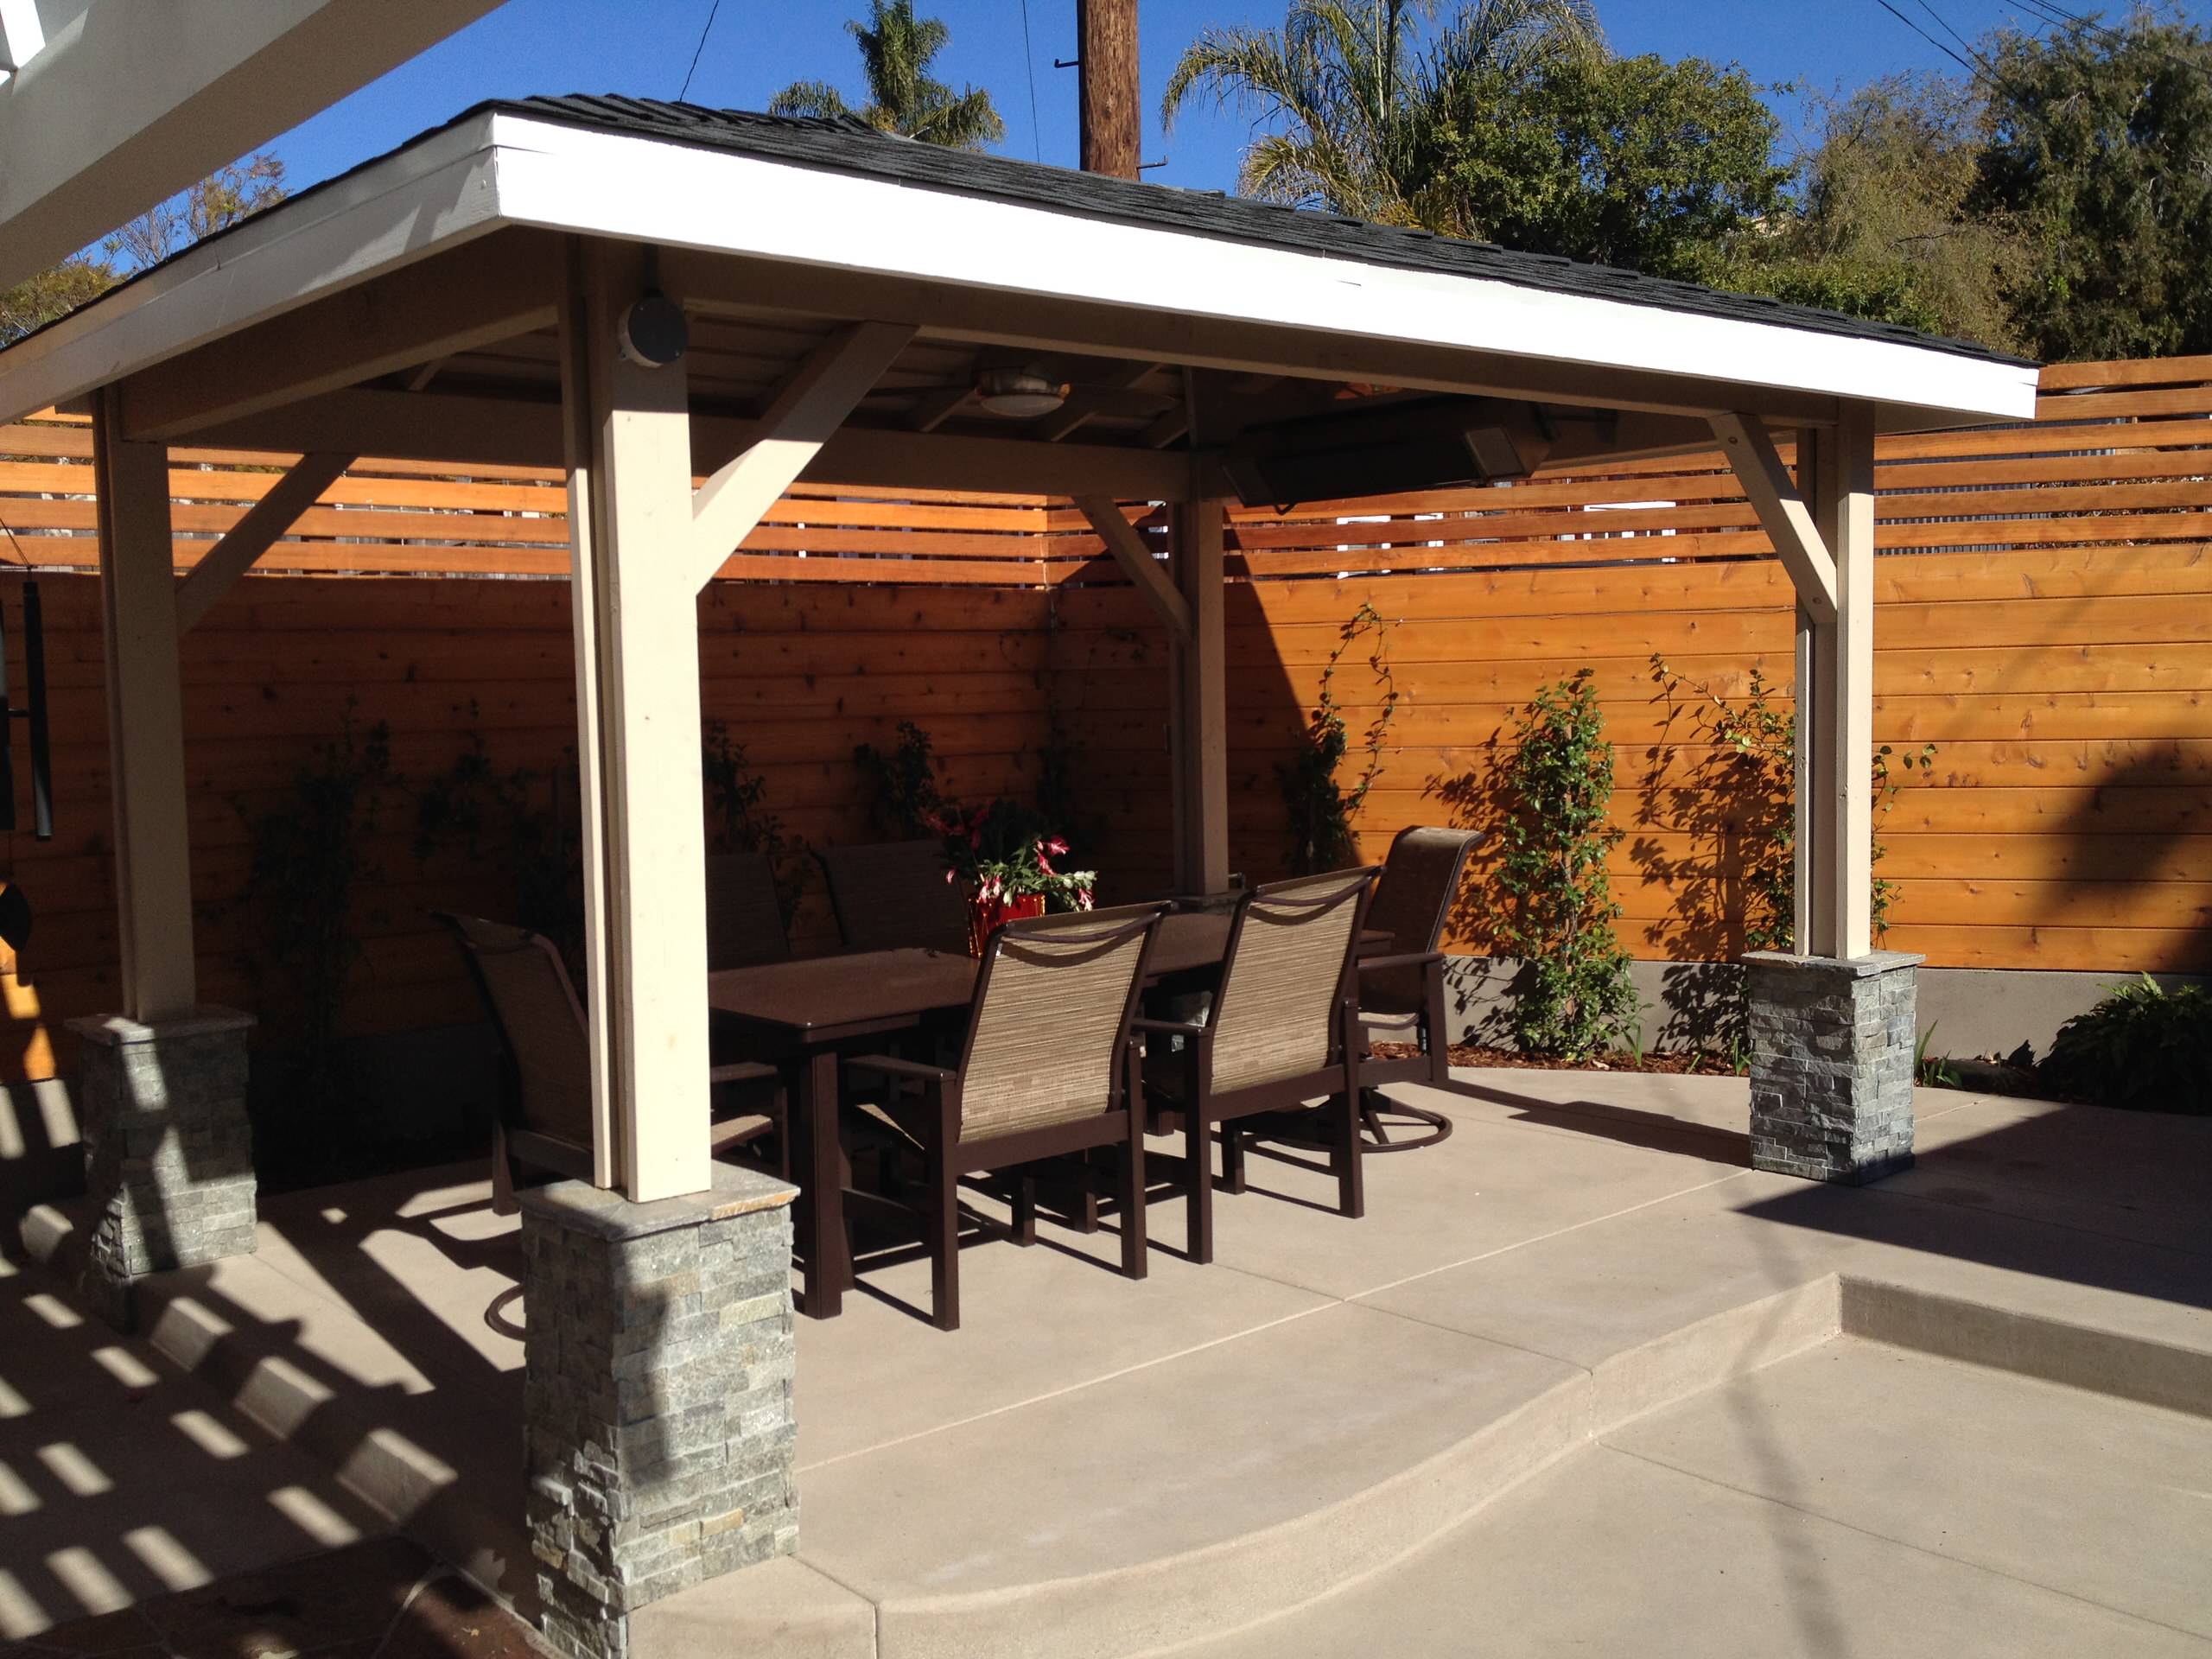 Covered Patio with Solid Roof Dining Area